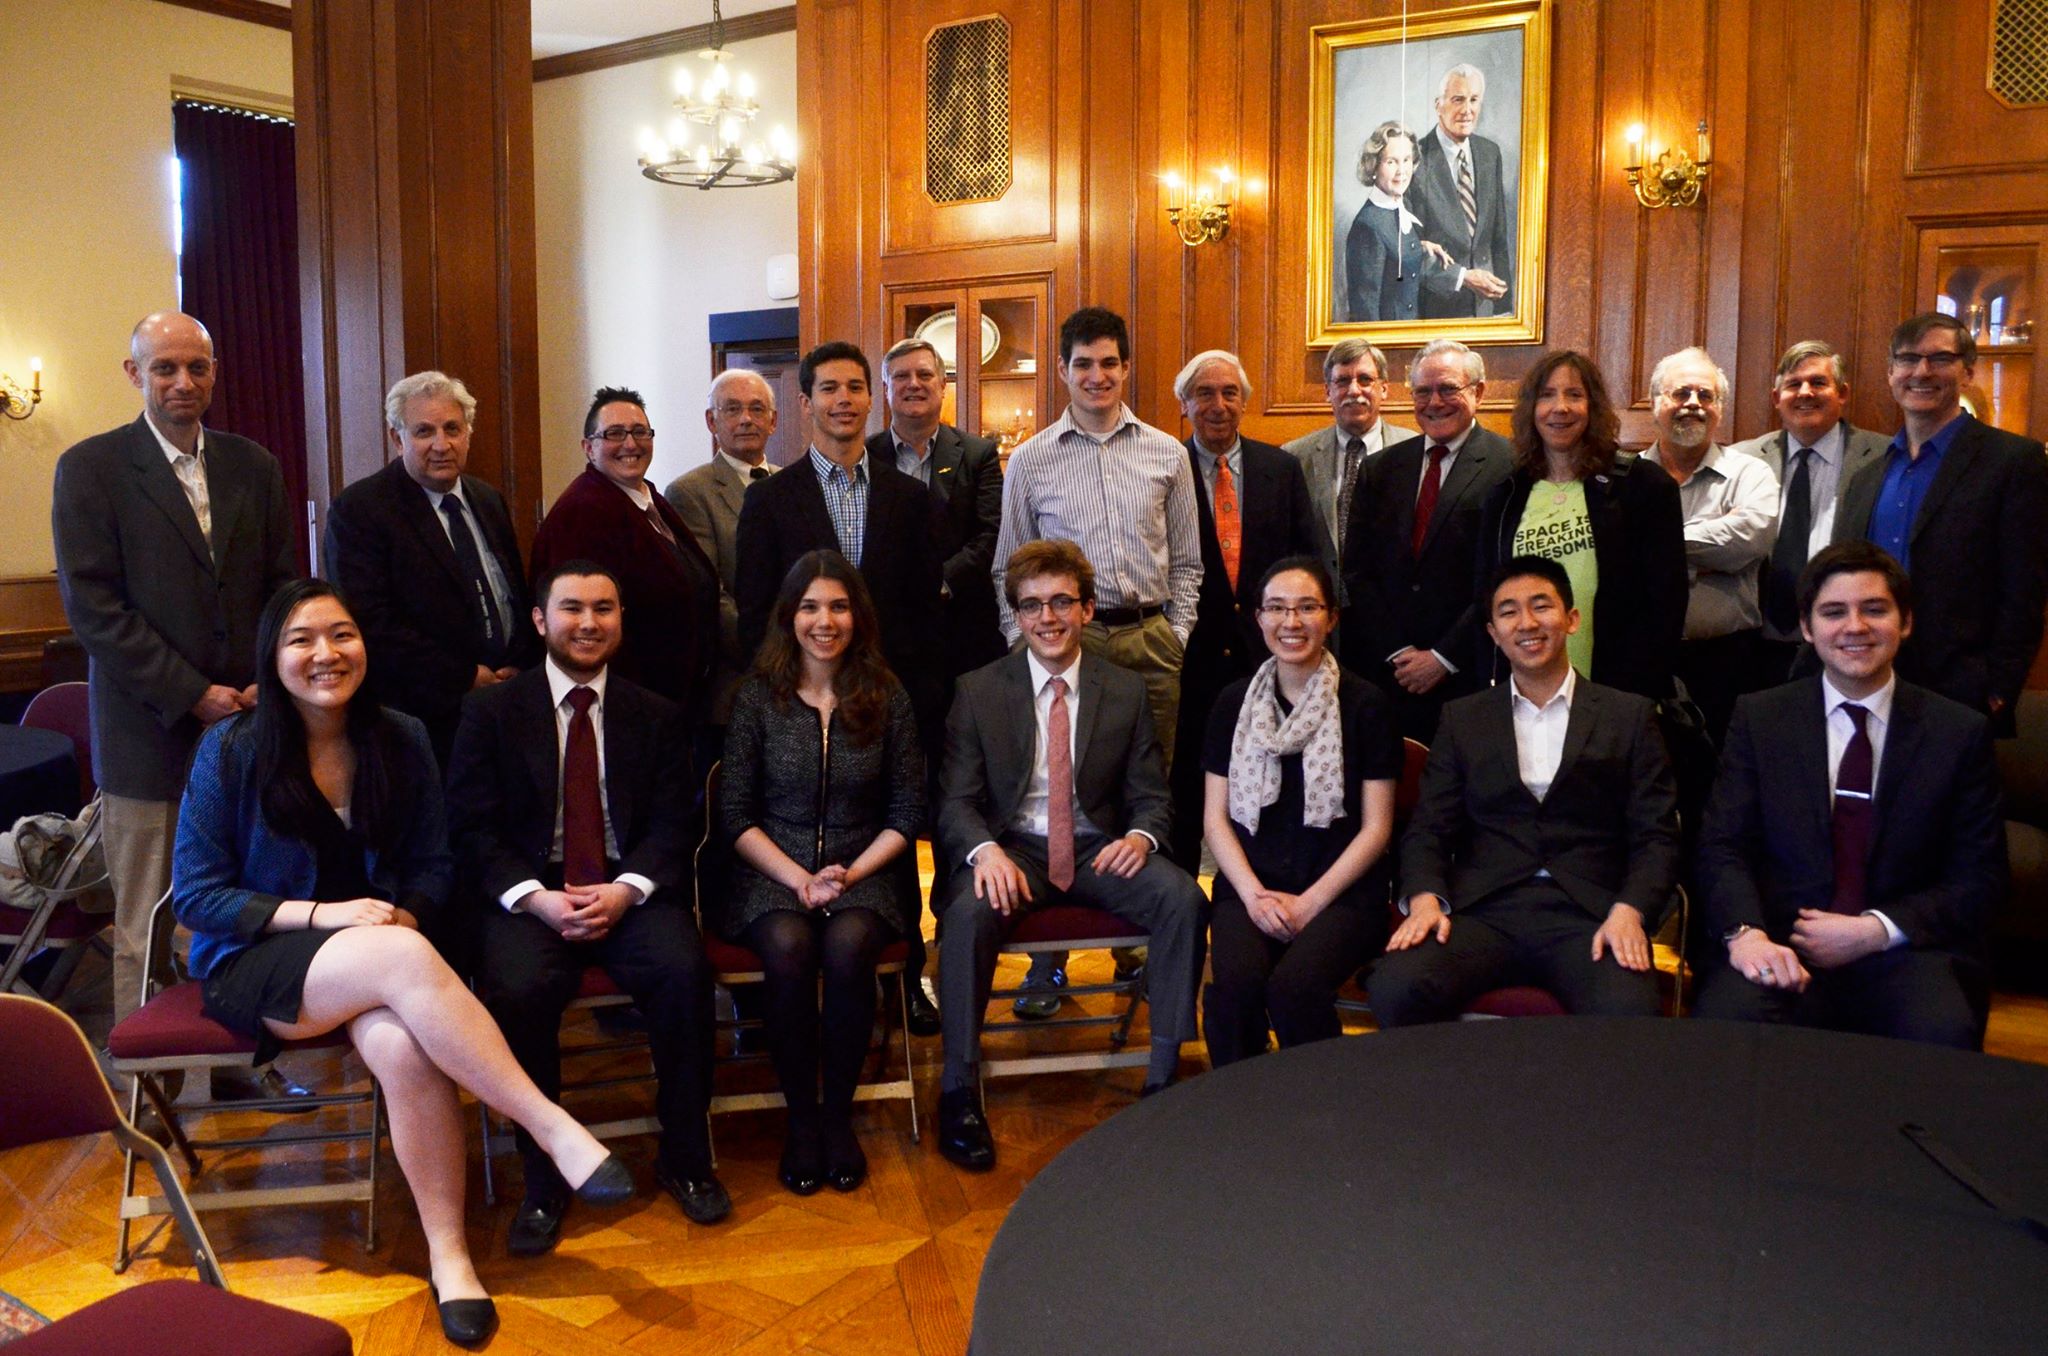 Group photo of Chicago Society members and speakers from last year's Spring Conference